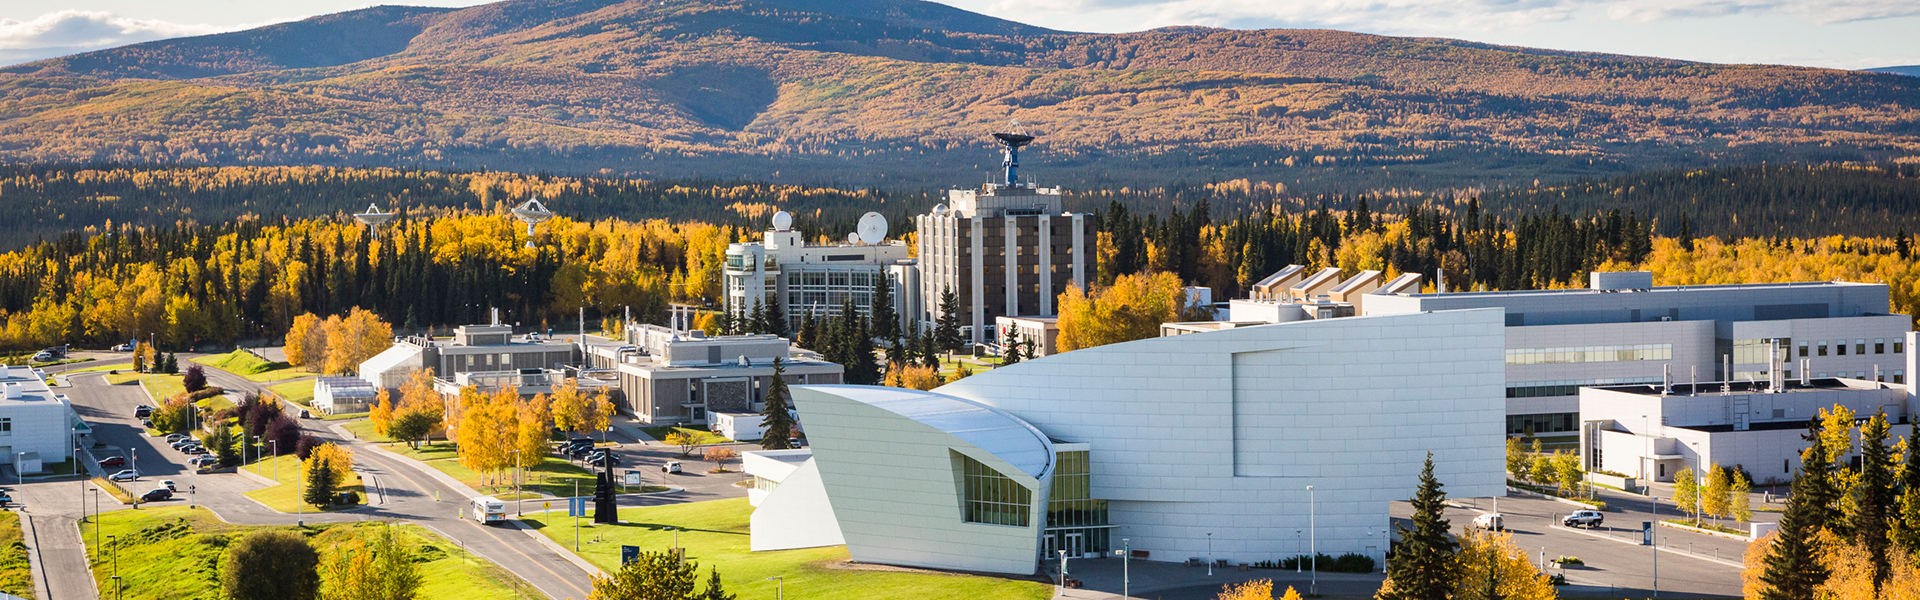 An aerial view of the Fairbanks campus overlooking West Ridge taken on September 2017.